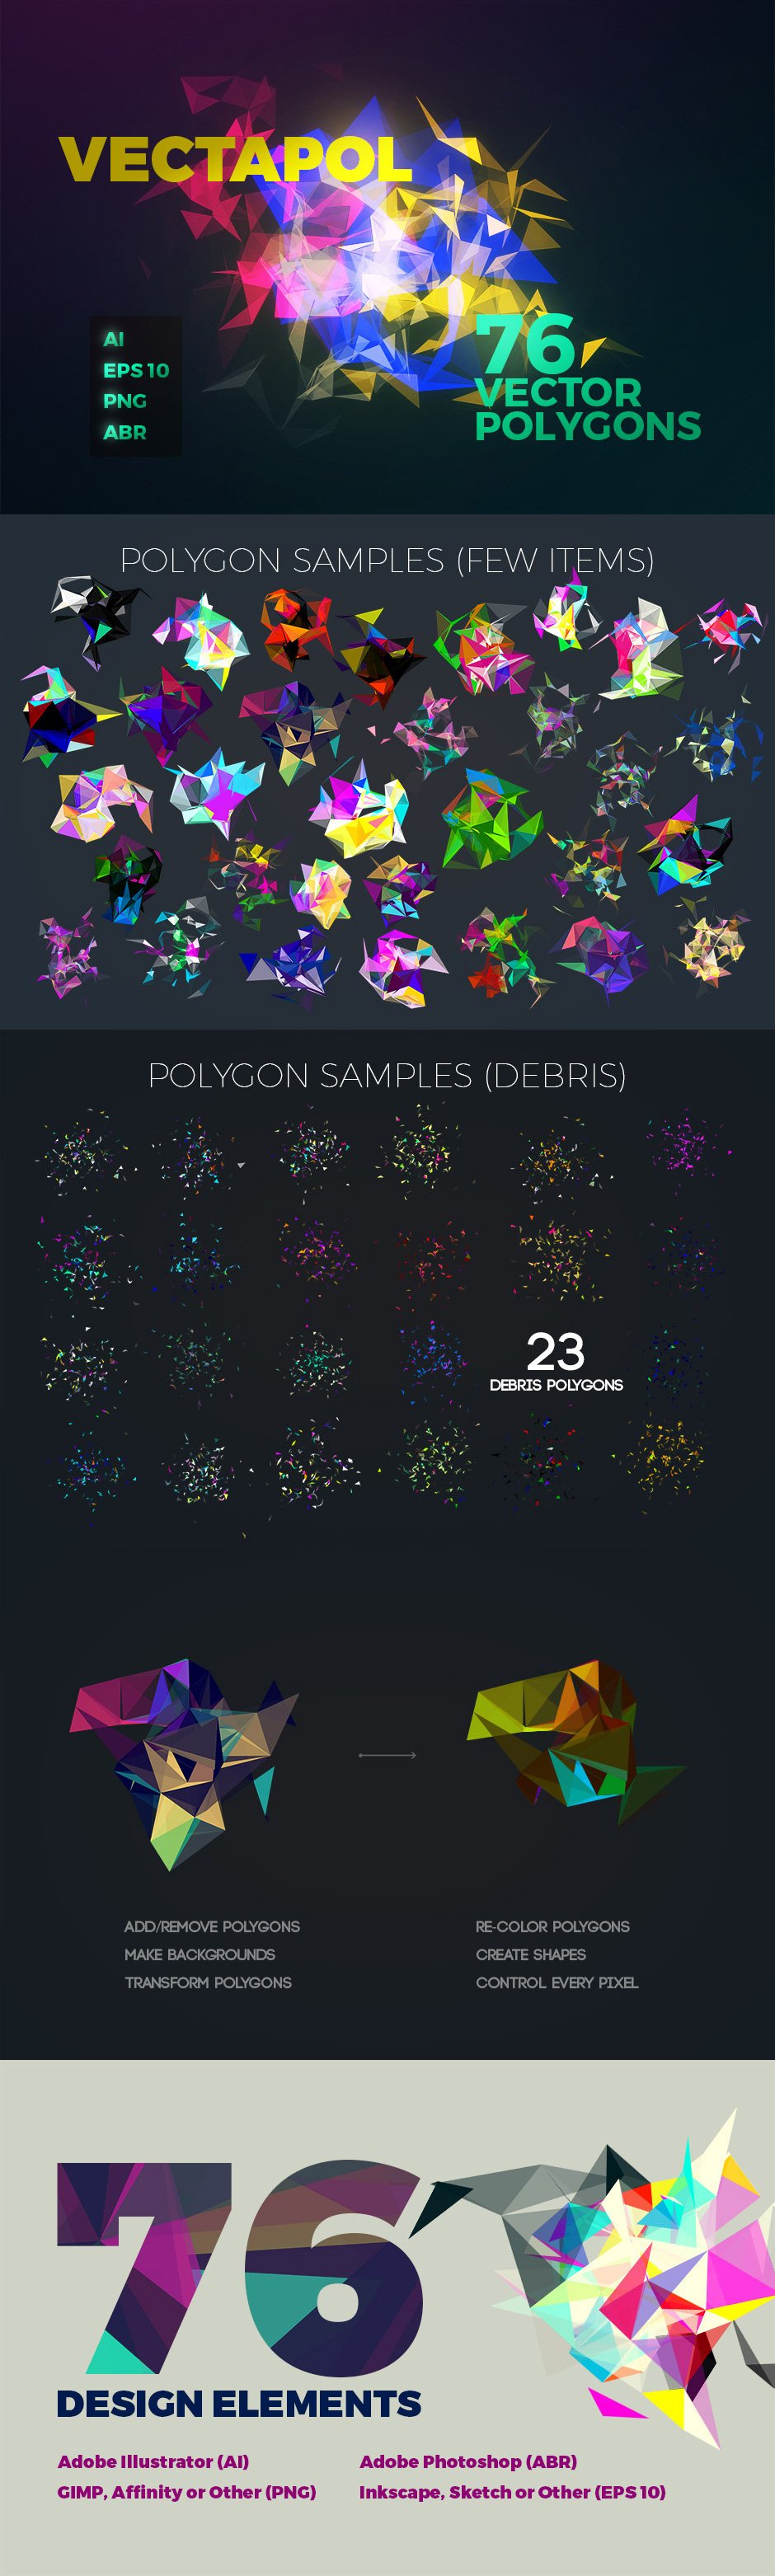 Vectapol Colorful Vector Renders